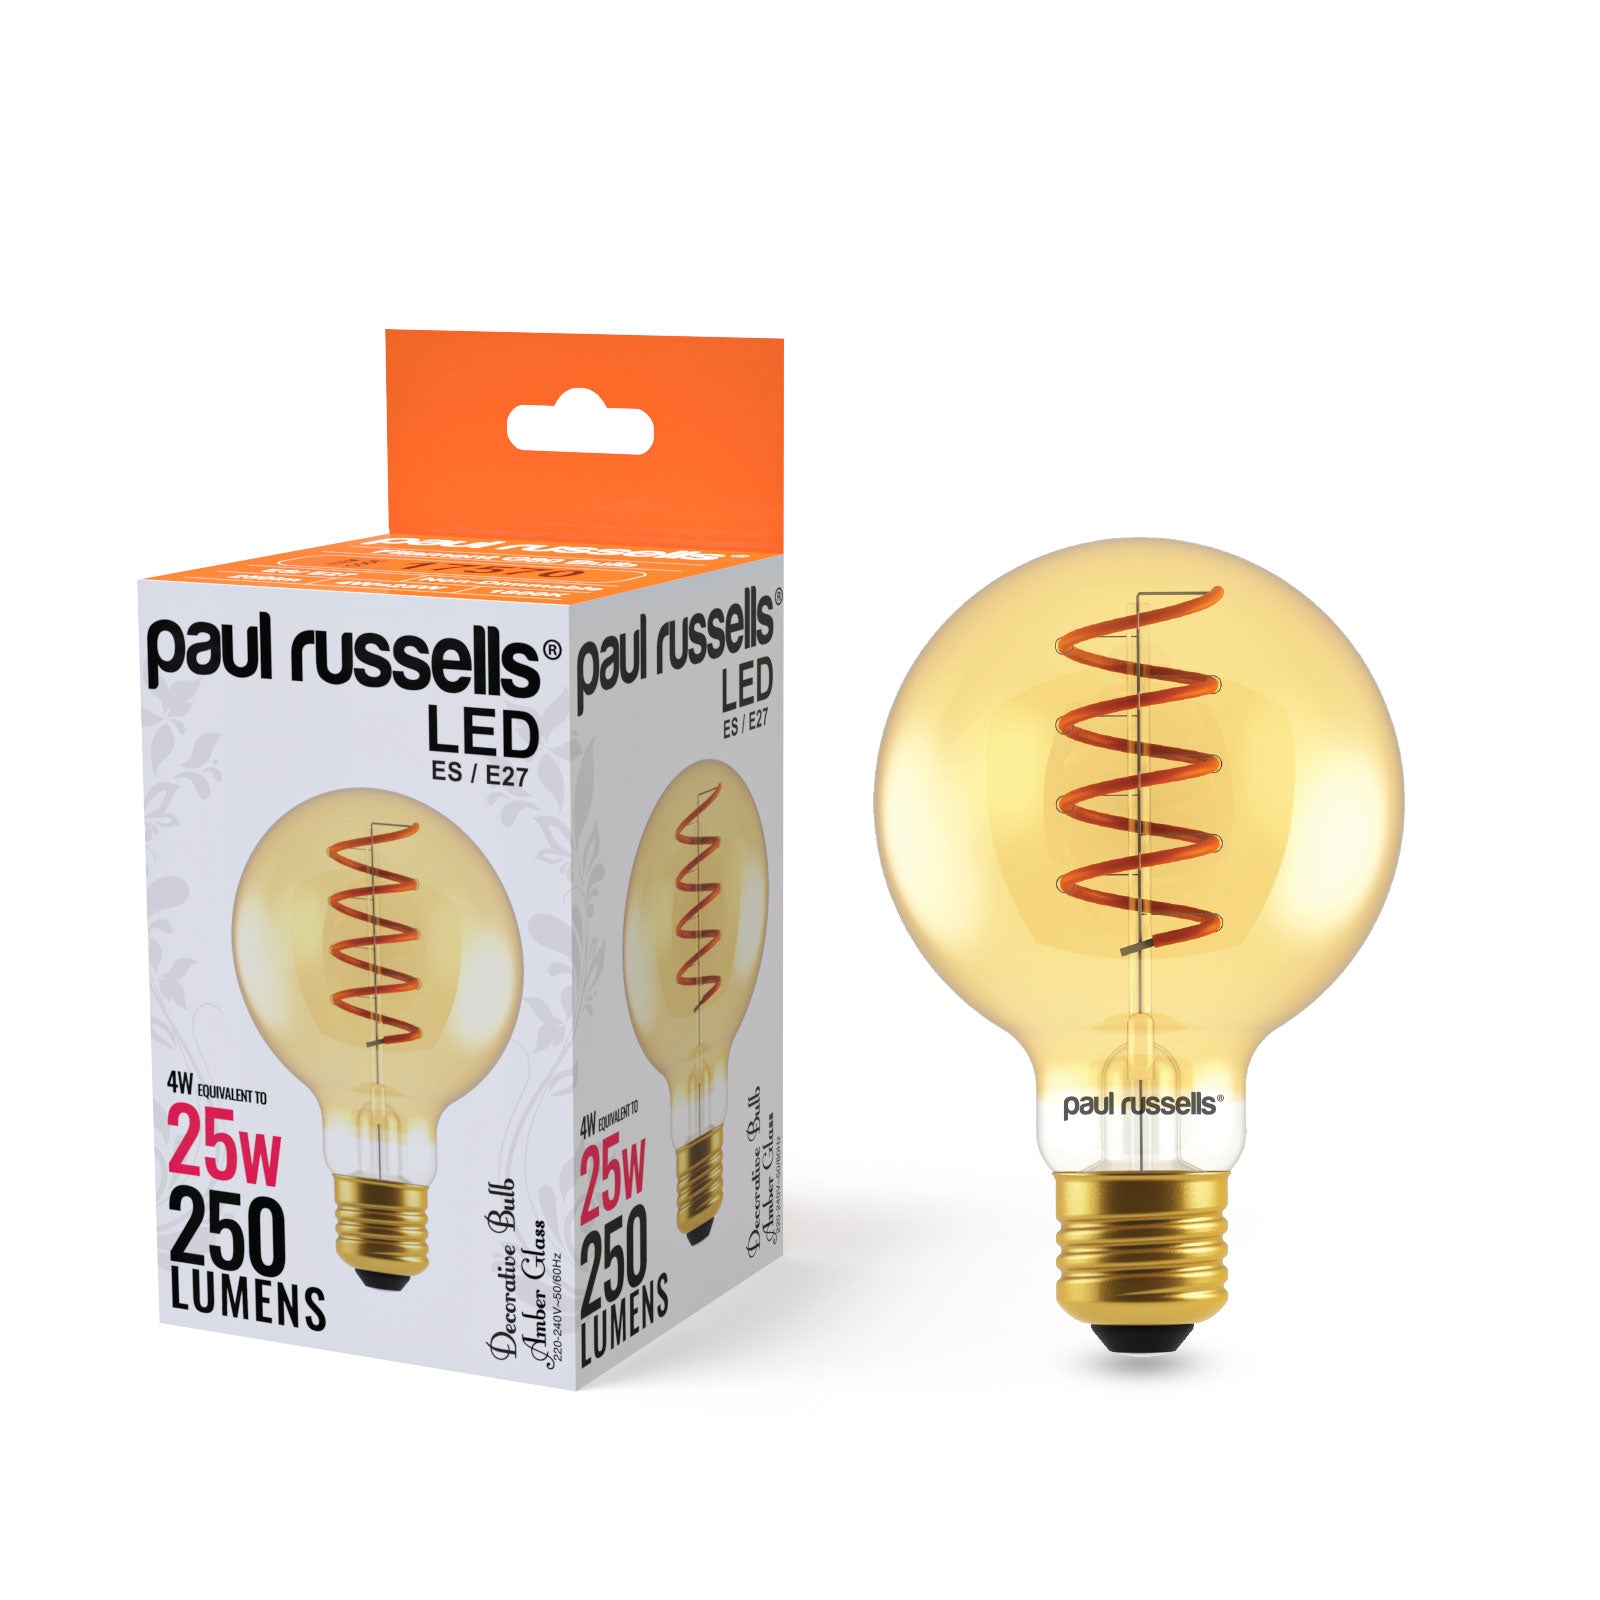 paul ES – Warm LED Filament Edison 4W=25w White (AMBER) G80 Extra Spiral E27 russells